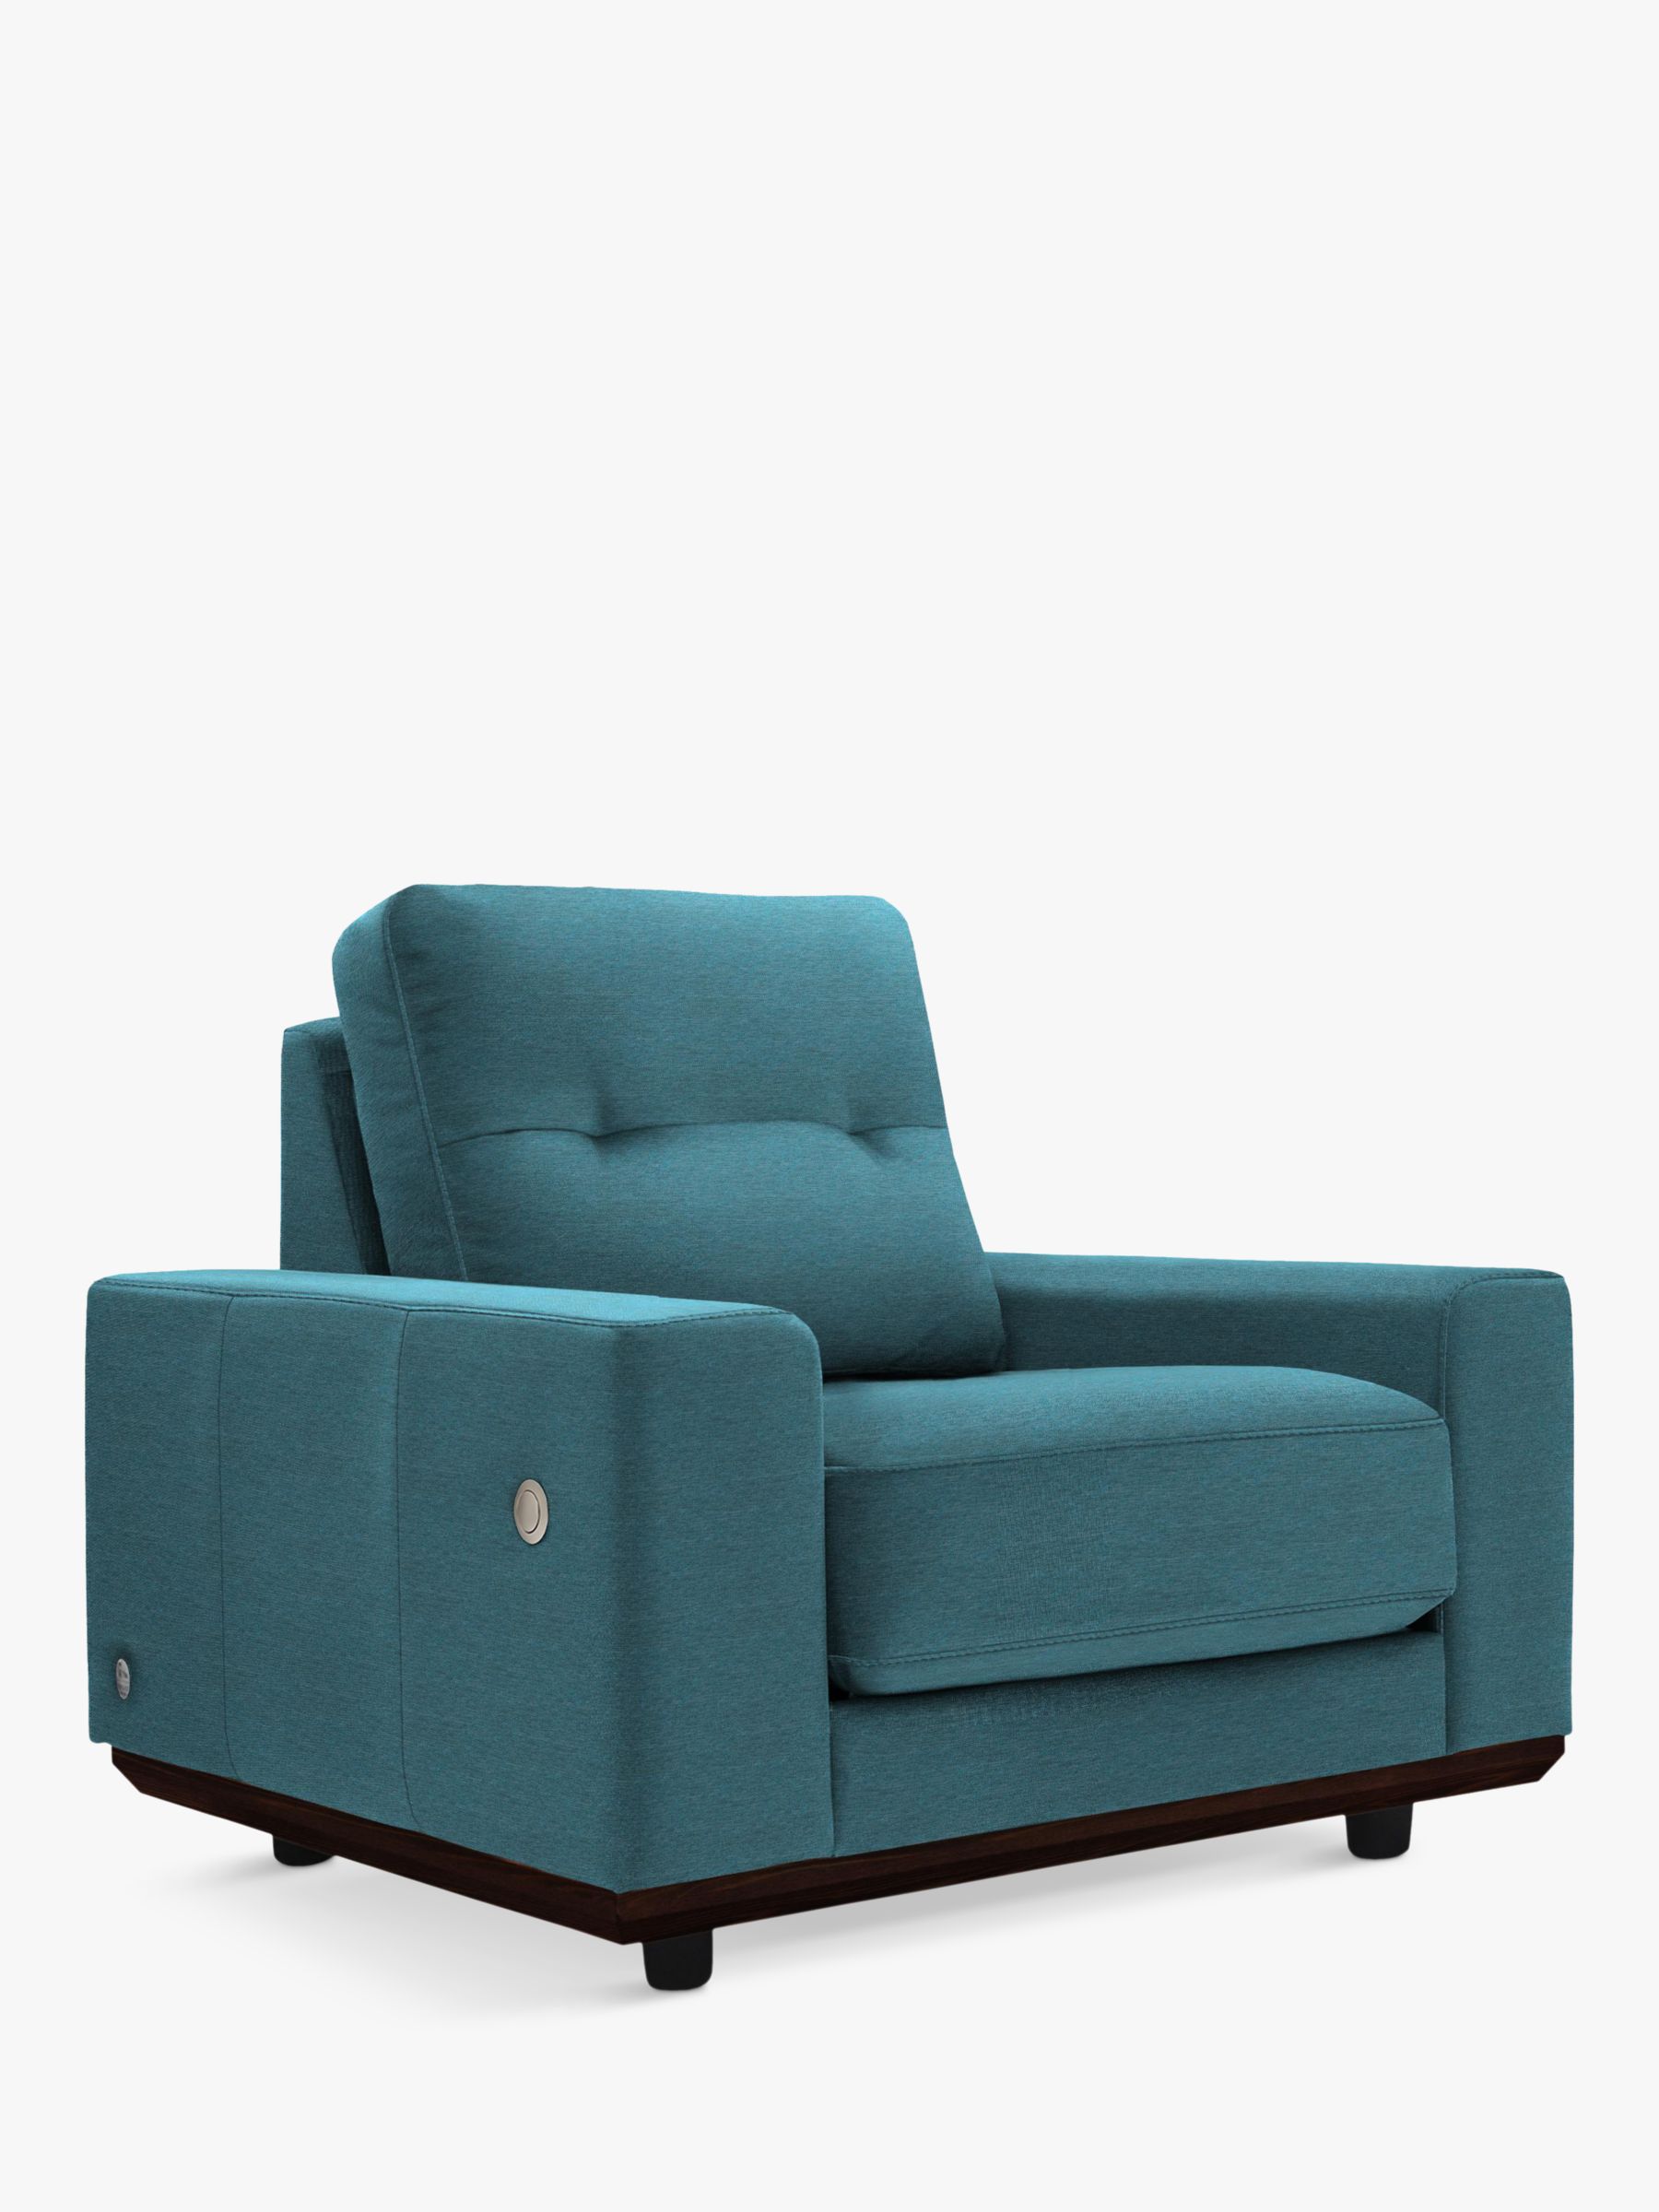 The Seventy One Range, G Plan Vintage The Seventy One with USB Charging Port Armchair, Fleck Blue